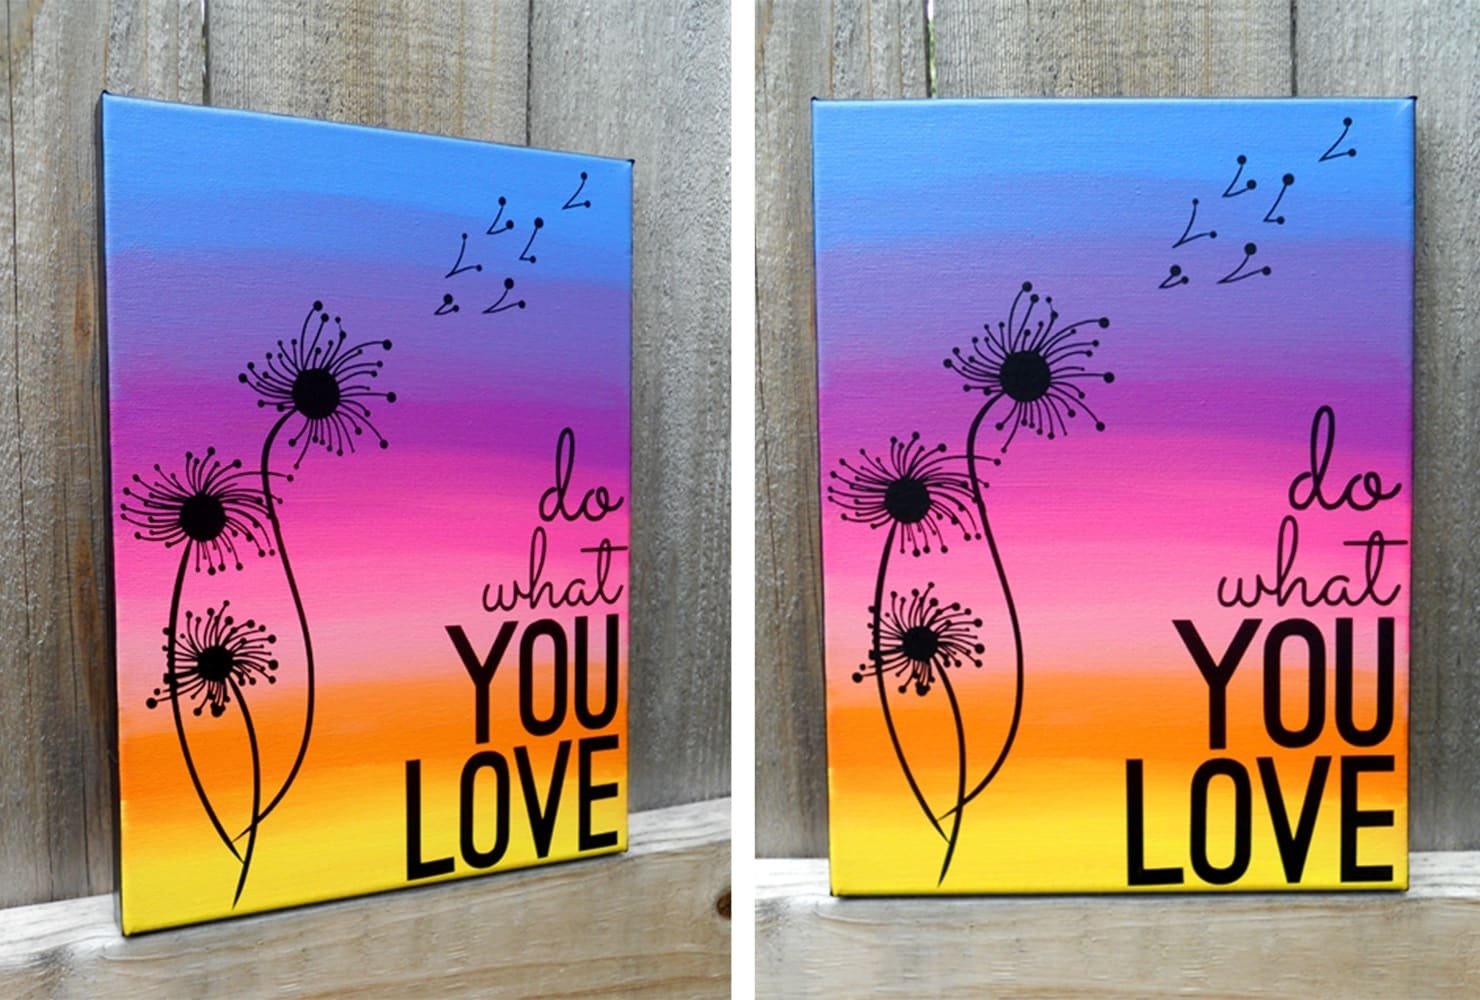 10 Stylish Ideas For Painting On Canvas 39 beautiful diy canvas painting ideas for your home shutterfly 2023